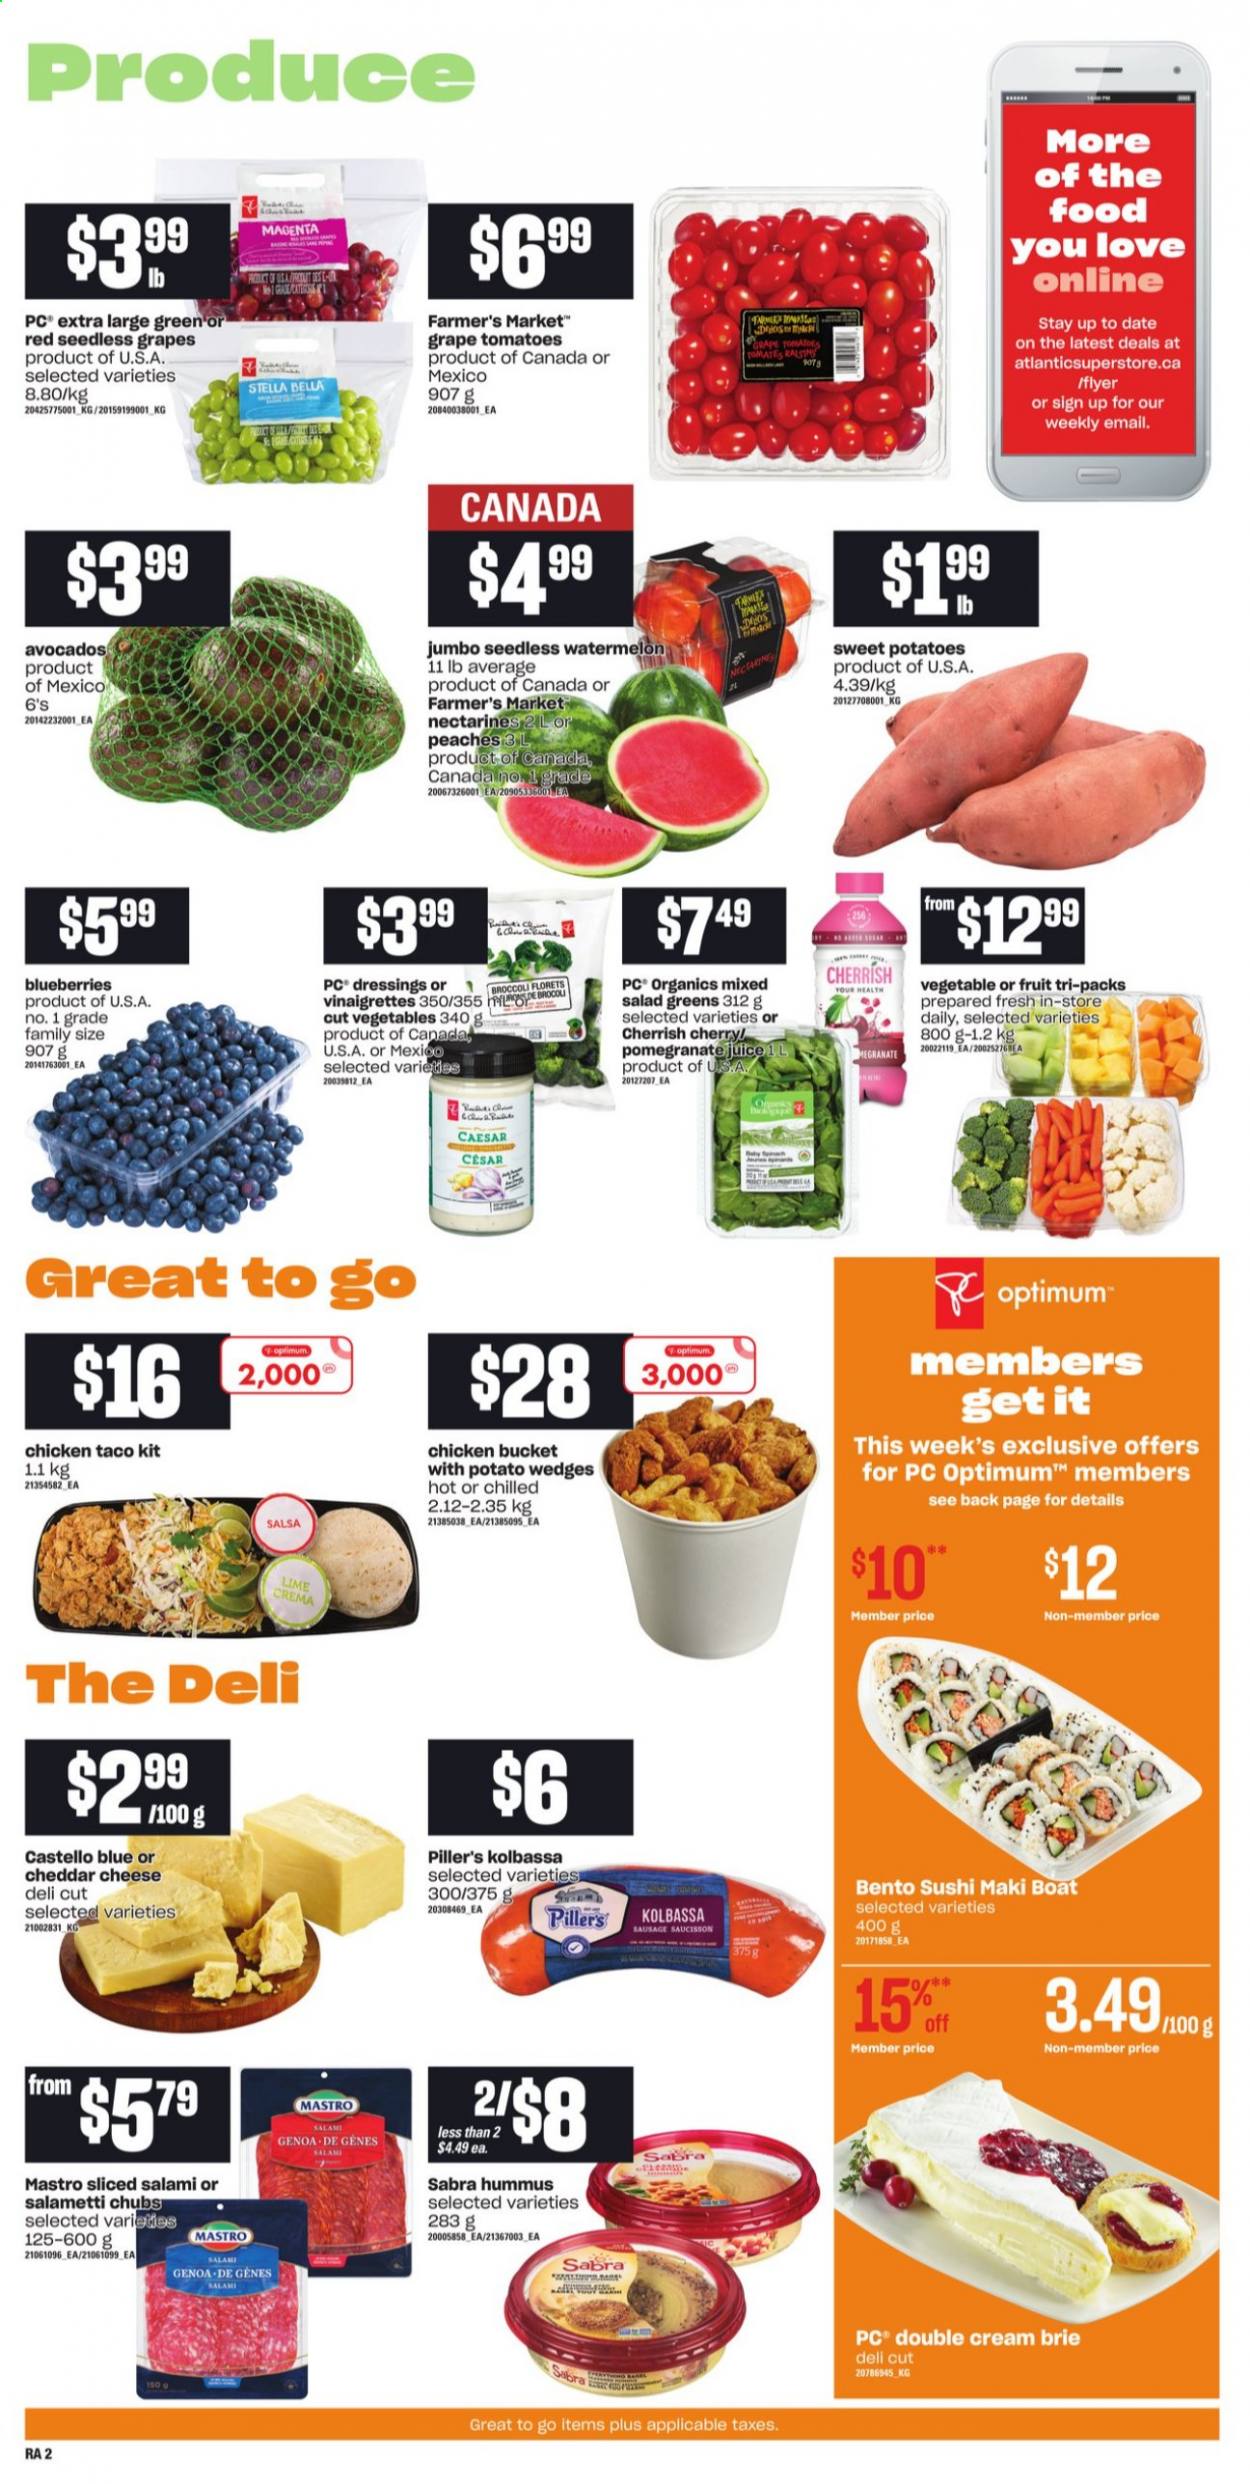 thumbnail - Atlantic Superstore Flyer - August 05, 2021 - August 11, 2021 - Sales products - Bella, broccoli, sweet potato, tomatoes, potatoes, salad greens, avocado, blueberries, nectarines, seedless grapes, watermelon, peaches, salami, sausage, hummus, cheese, brie, potato wedges, salsa, Optimum. Page 2.